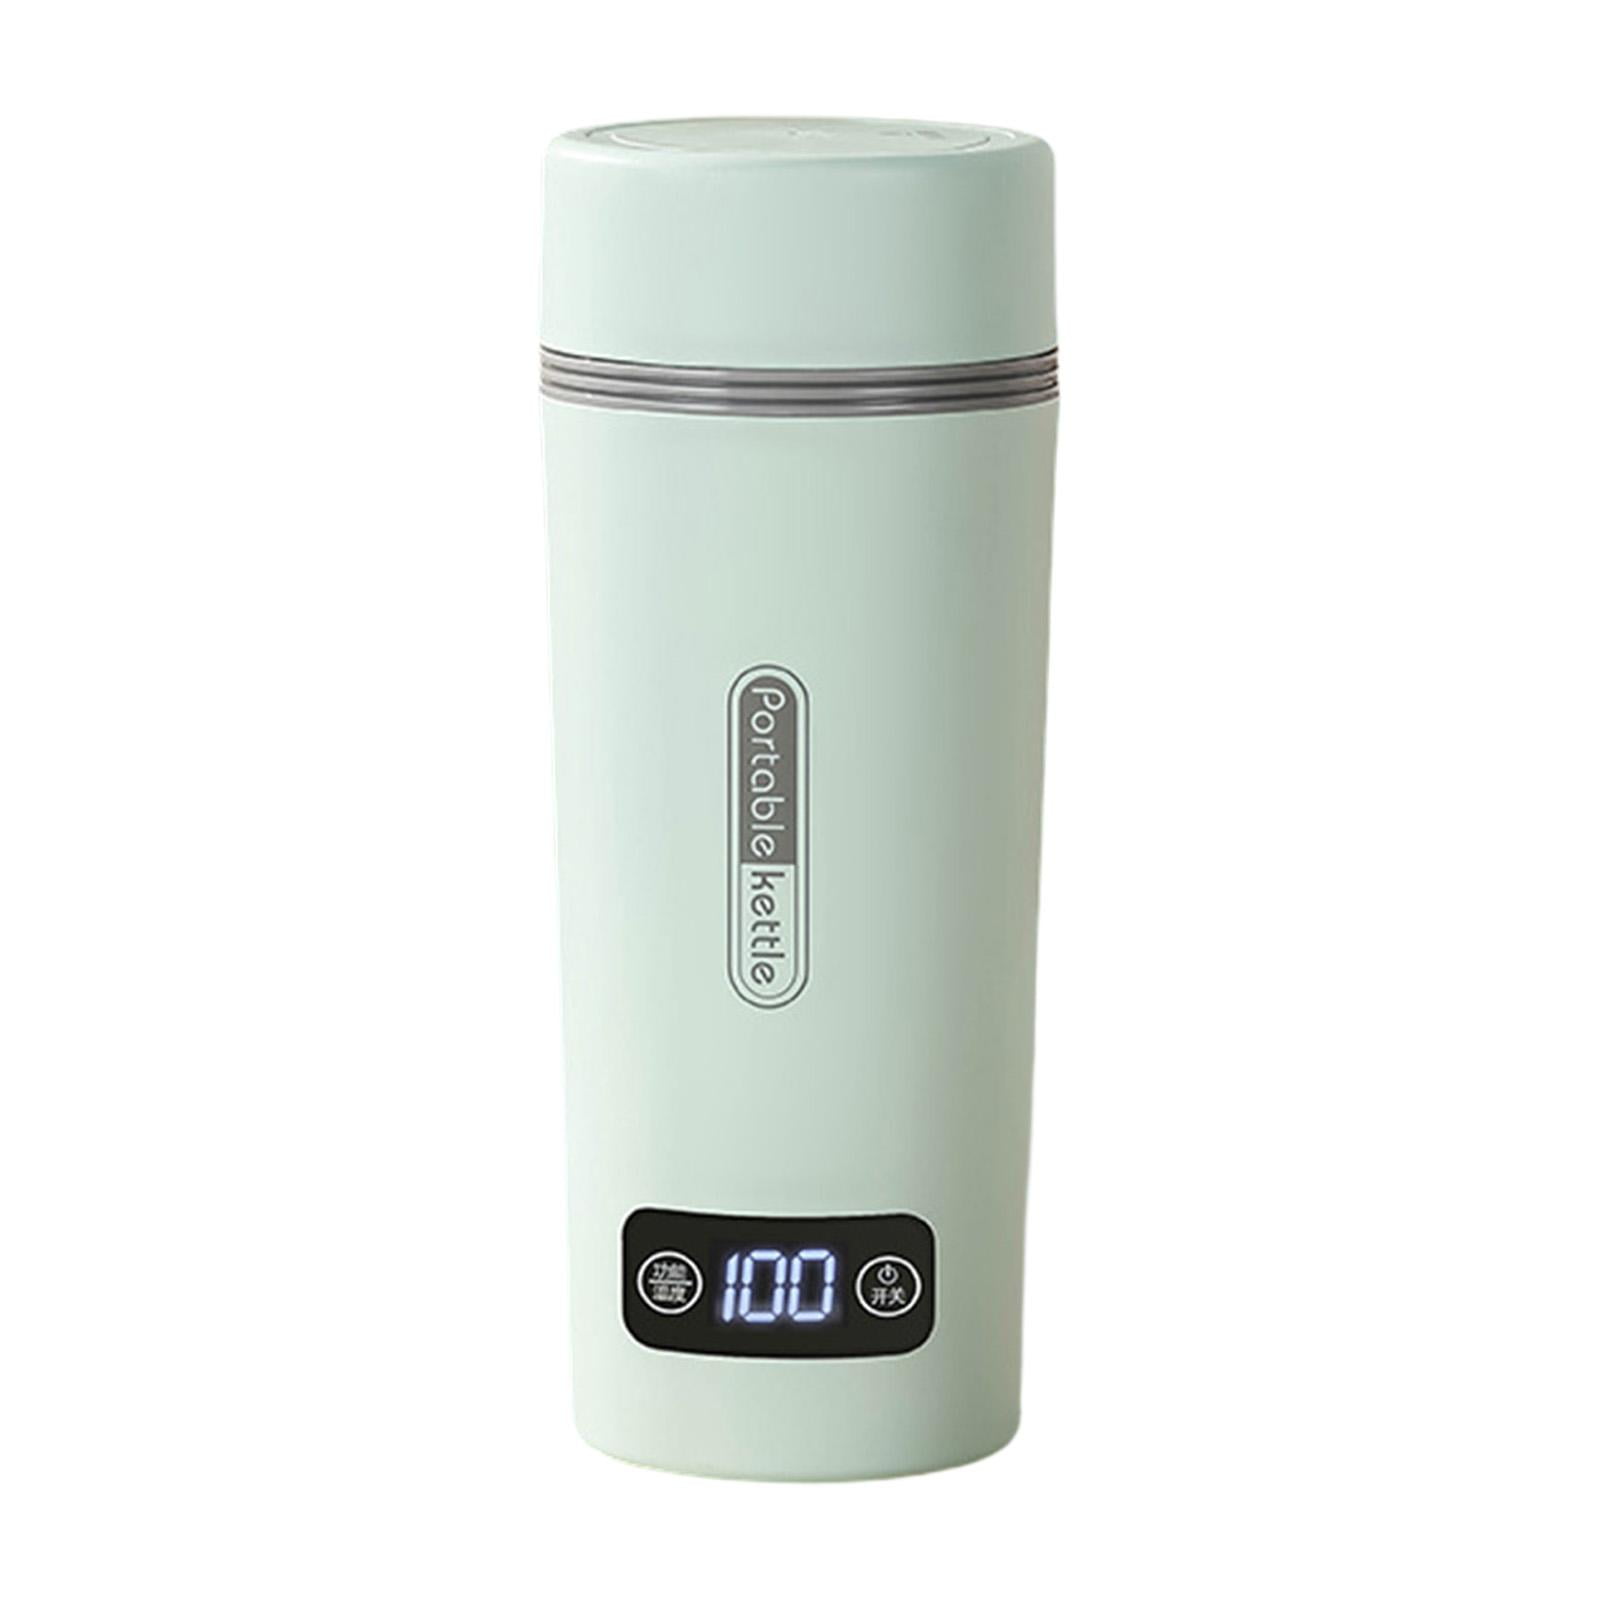 Electric Kettle, Insulated Stainless Steel Portable Kettle